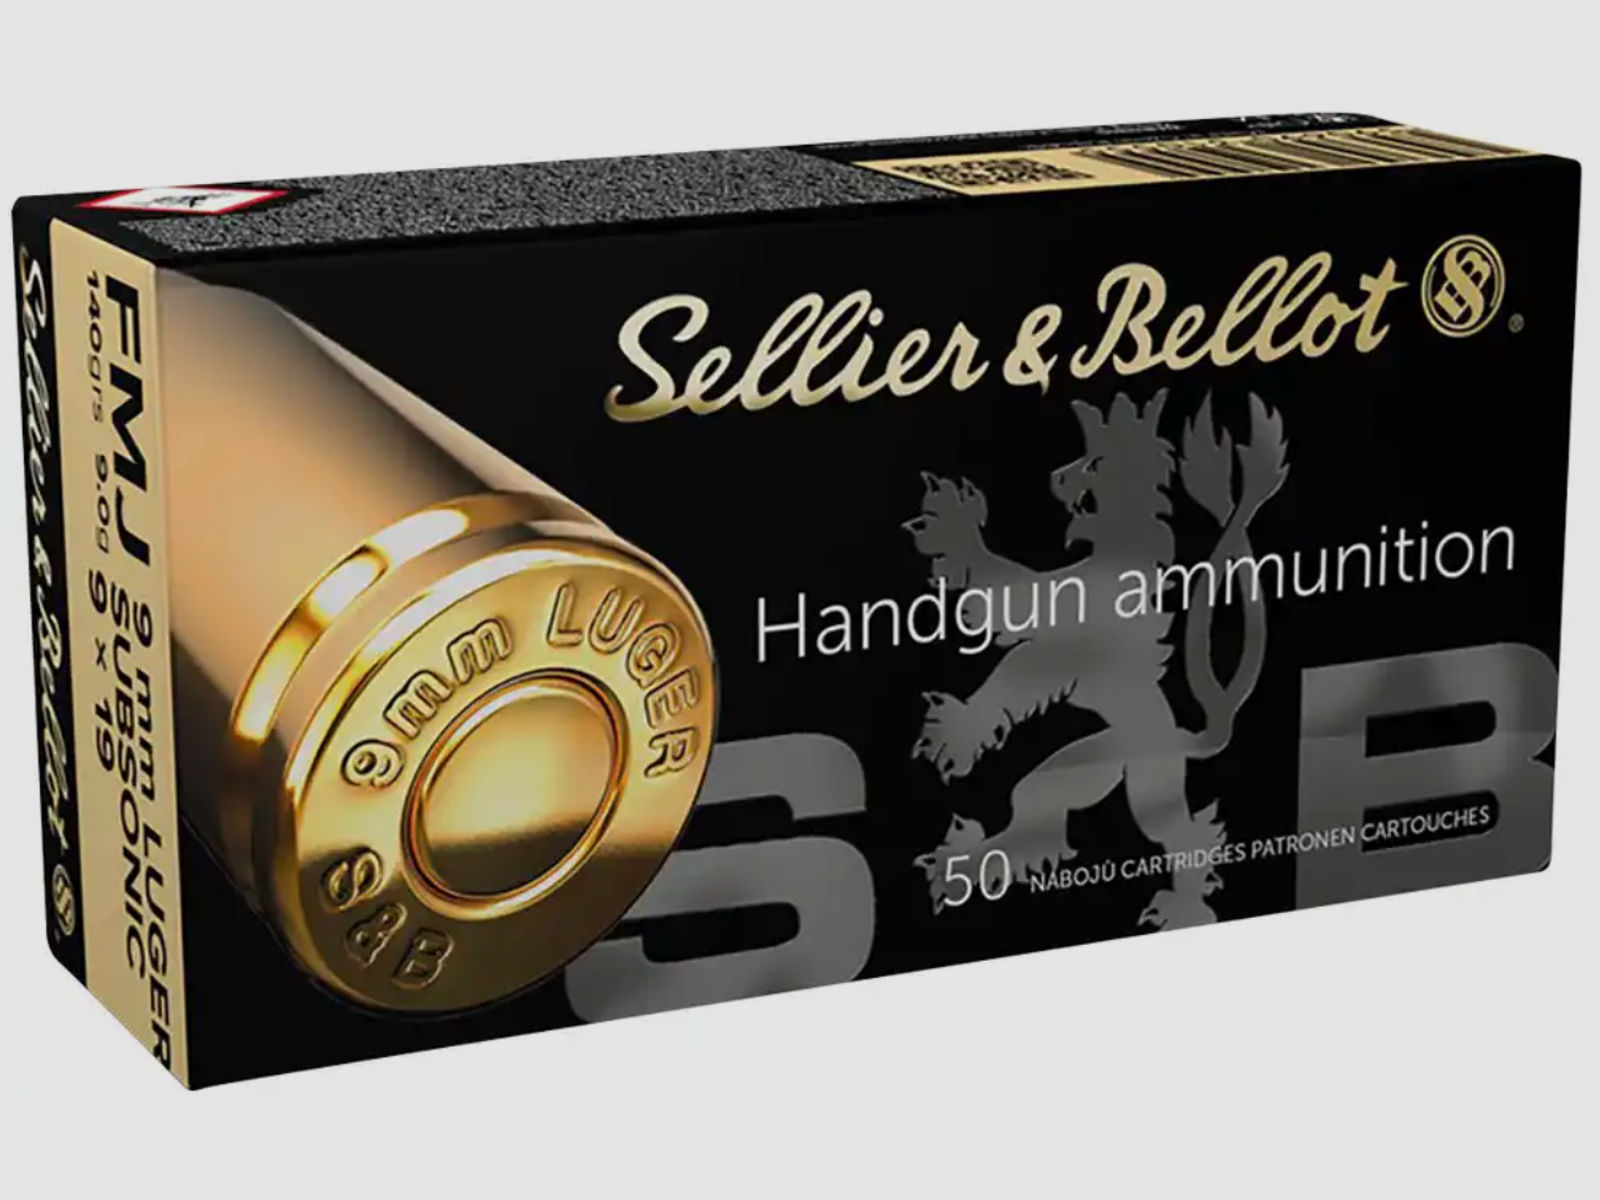 Sellier & Bellot 9mm Luger Vollmantel Subsonic 9,0g 140grs.